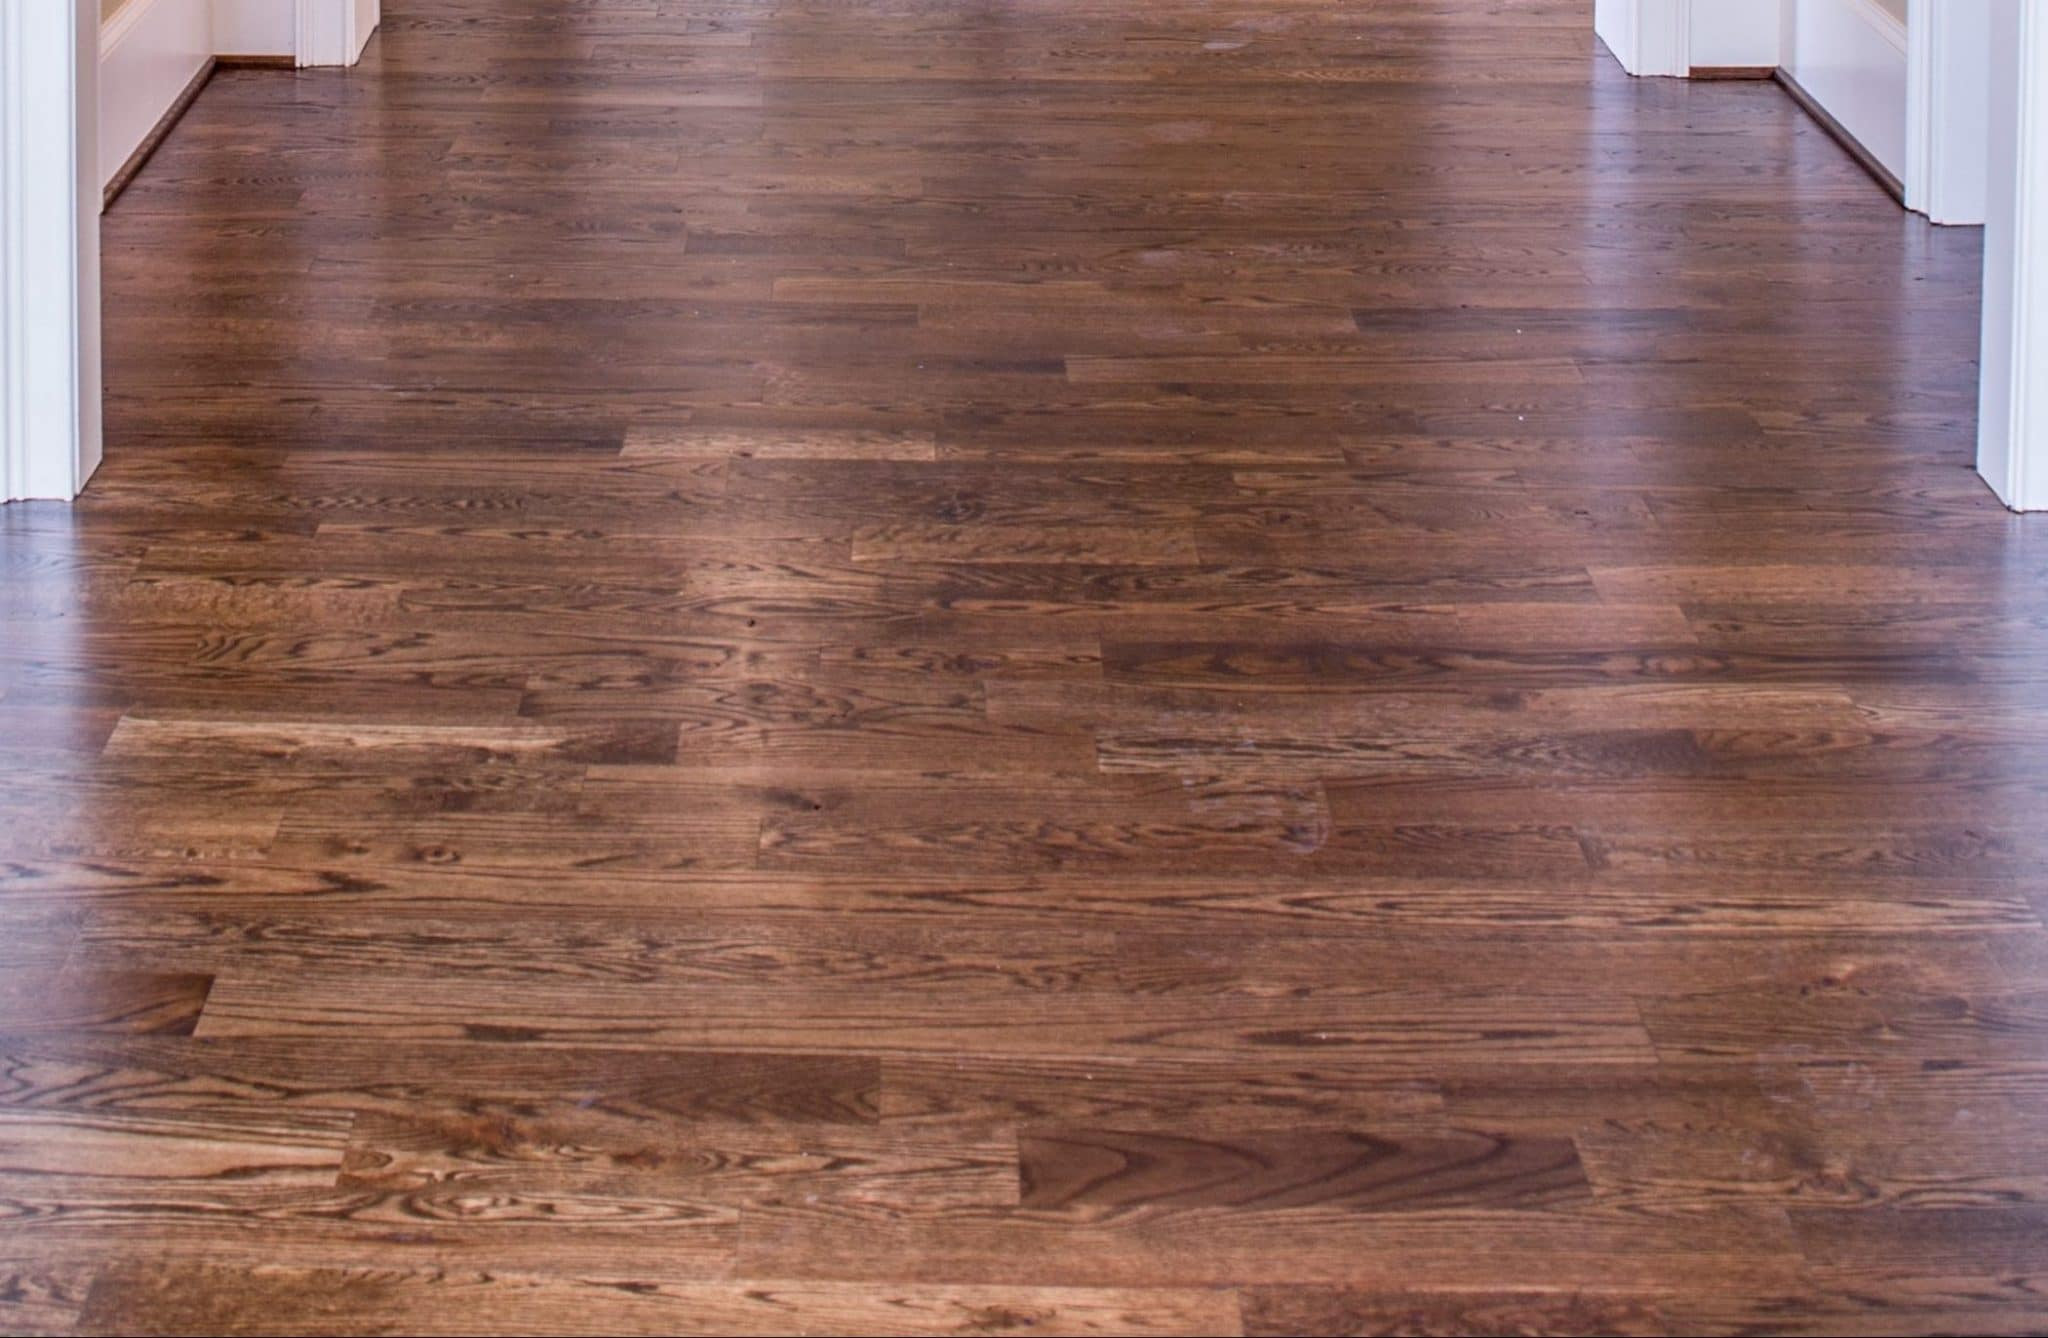 10 Fantastic Unfinished Hardwood Flooring San Antonio 2024 free download unfinished hardwood flooring san antonio of how to remove nail polish from hardwood floors floor with unfinished wood how to remove nail polish from hardwood floors hardwood floor cleaning h